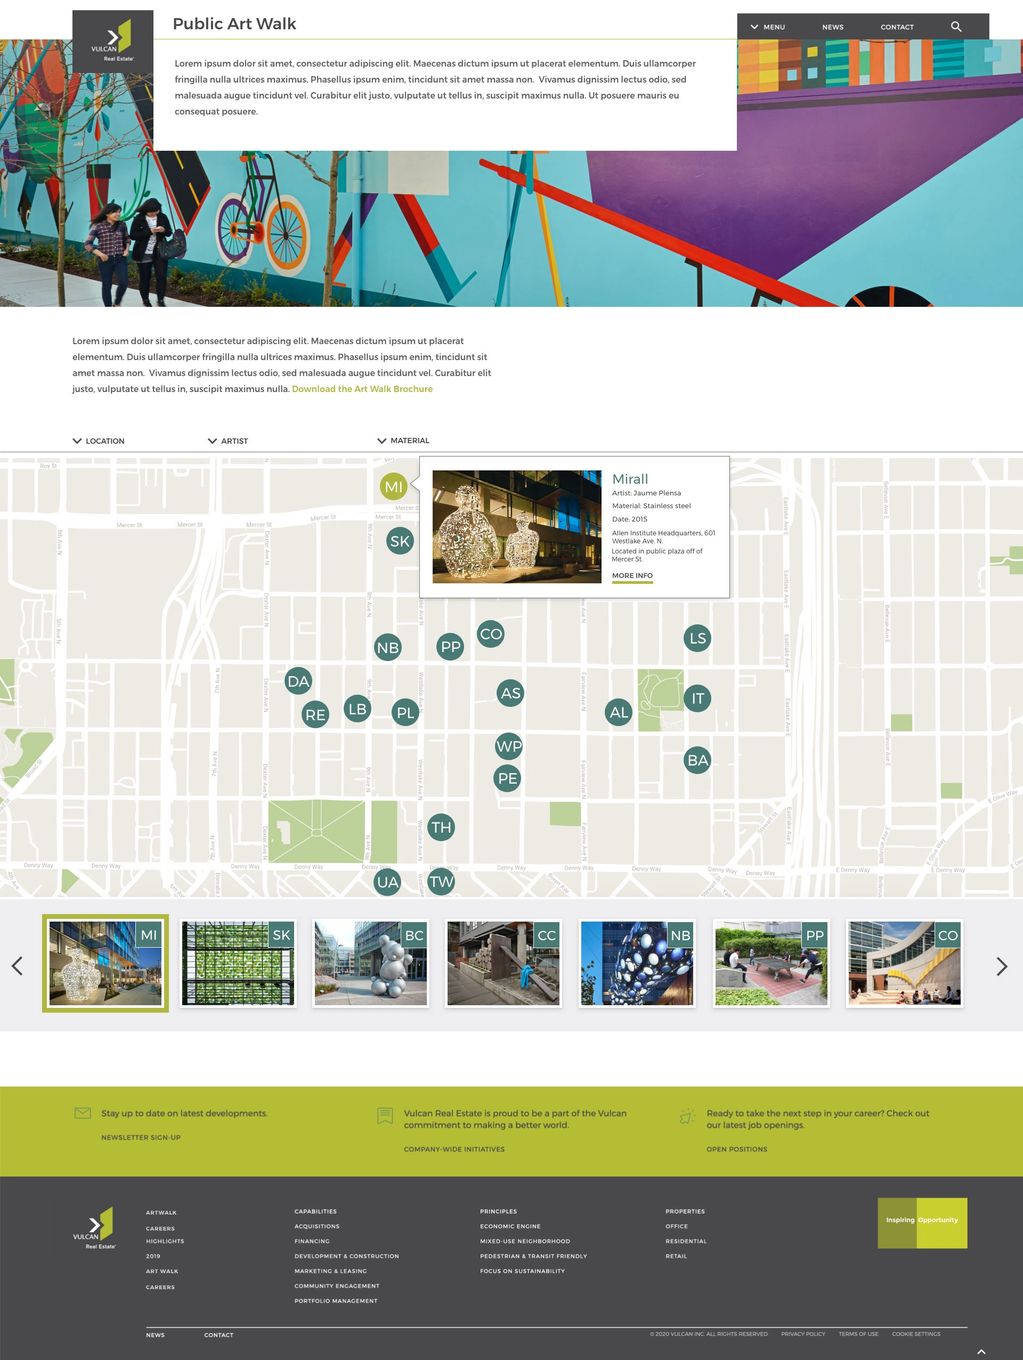 A map of Seattle and Bellevue showing VRE public art. A popover showing the art work's info.